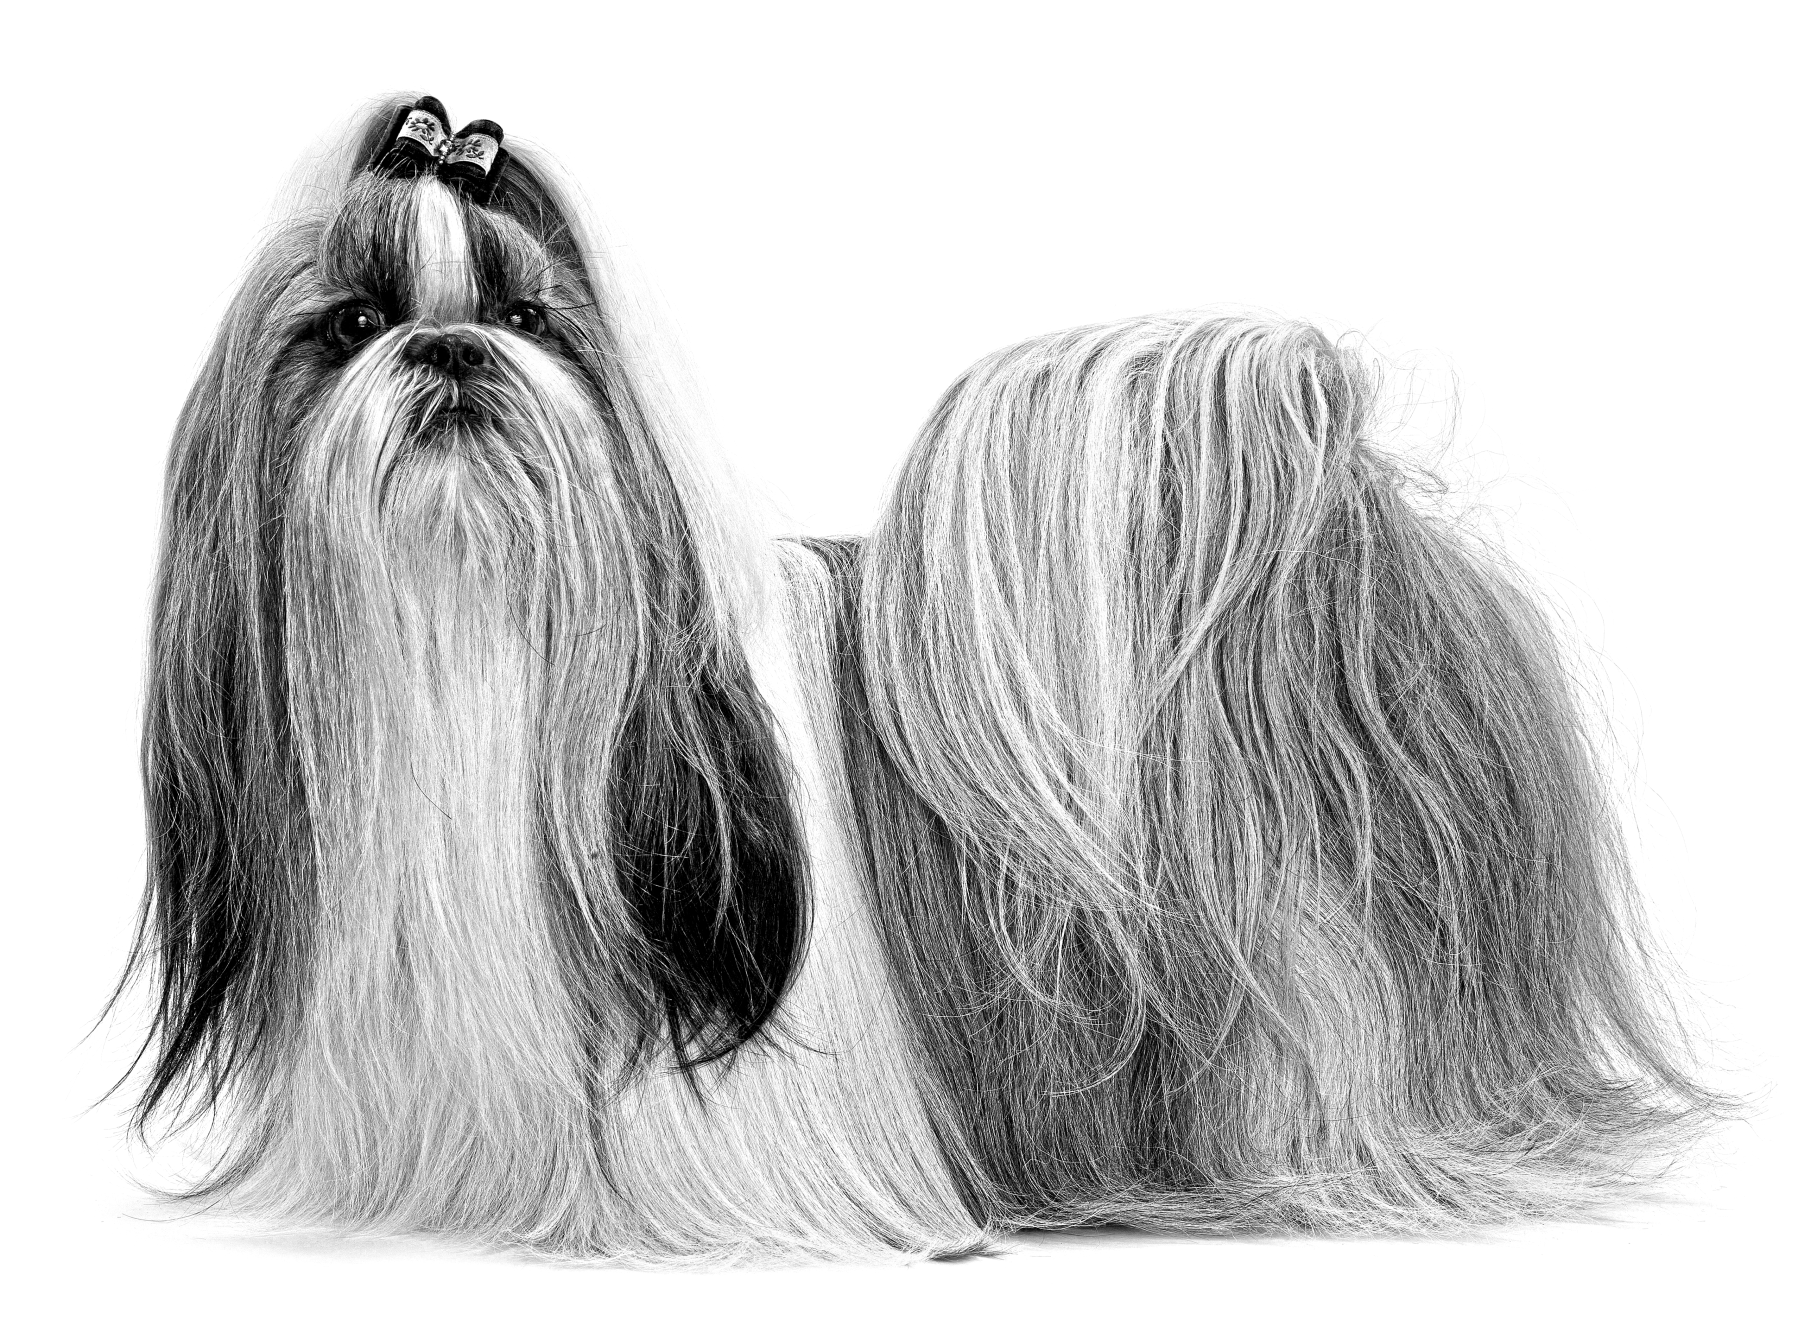 Side-view of Shih Tzu with bow clip in its fur